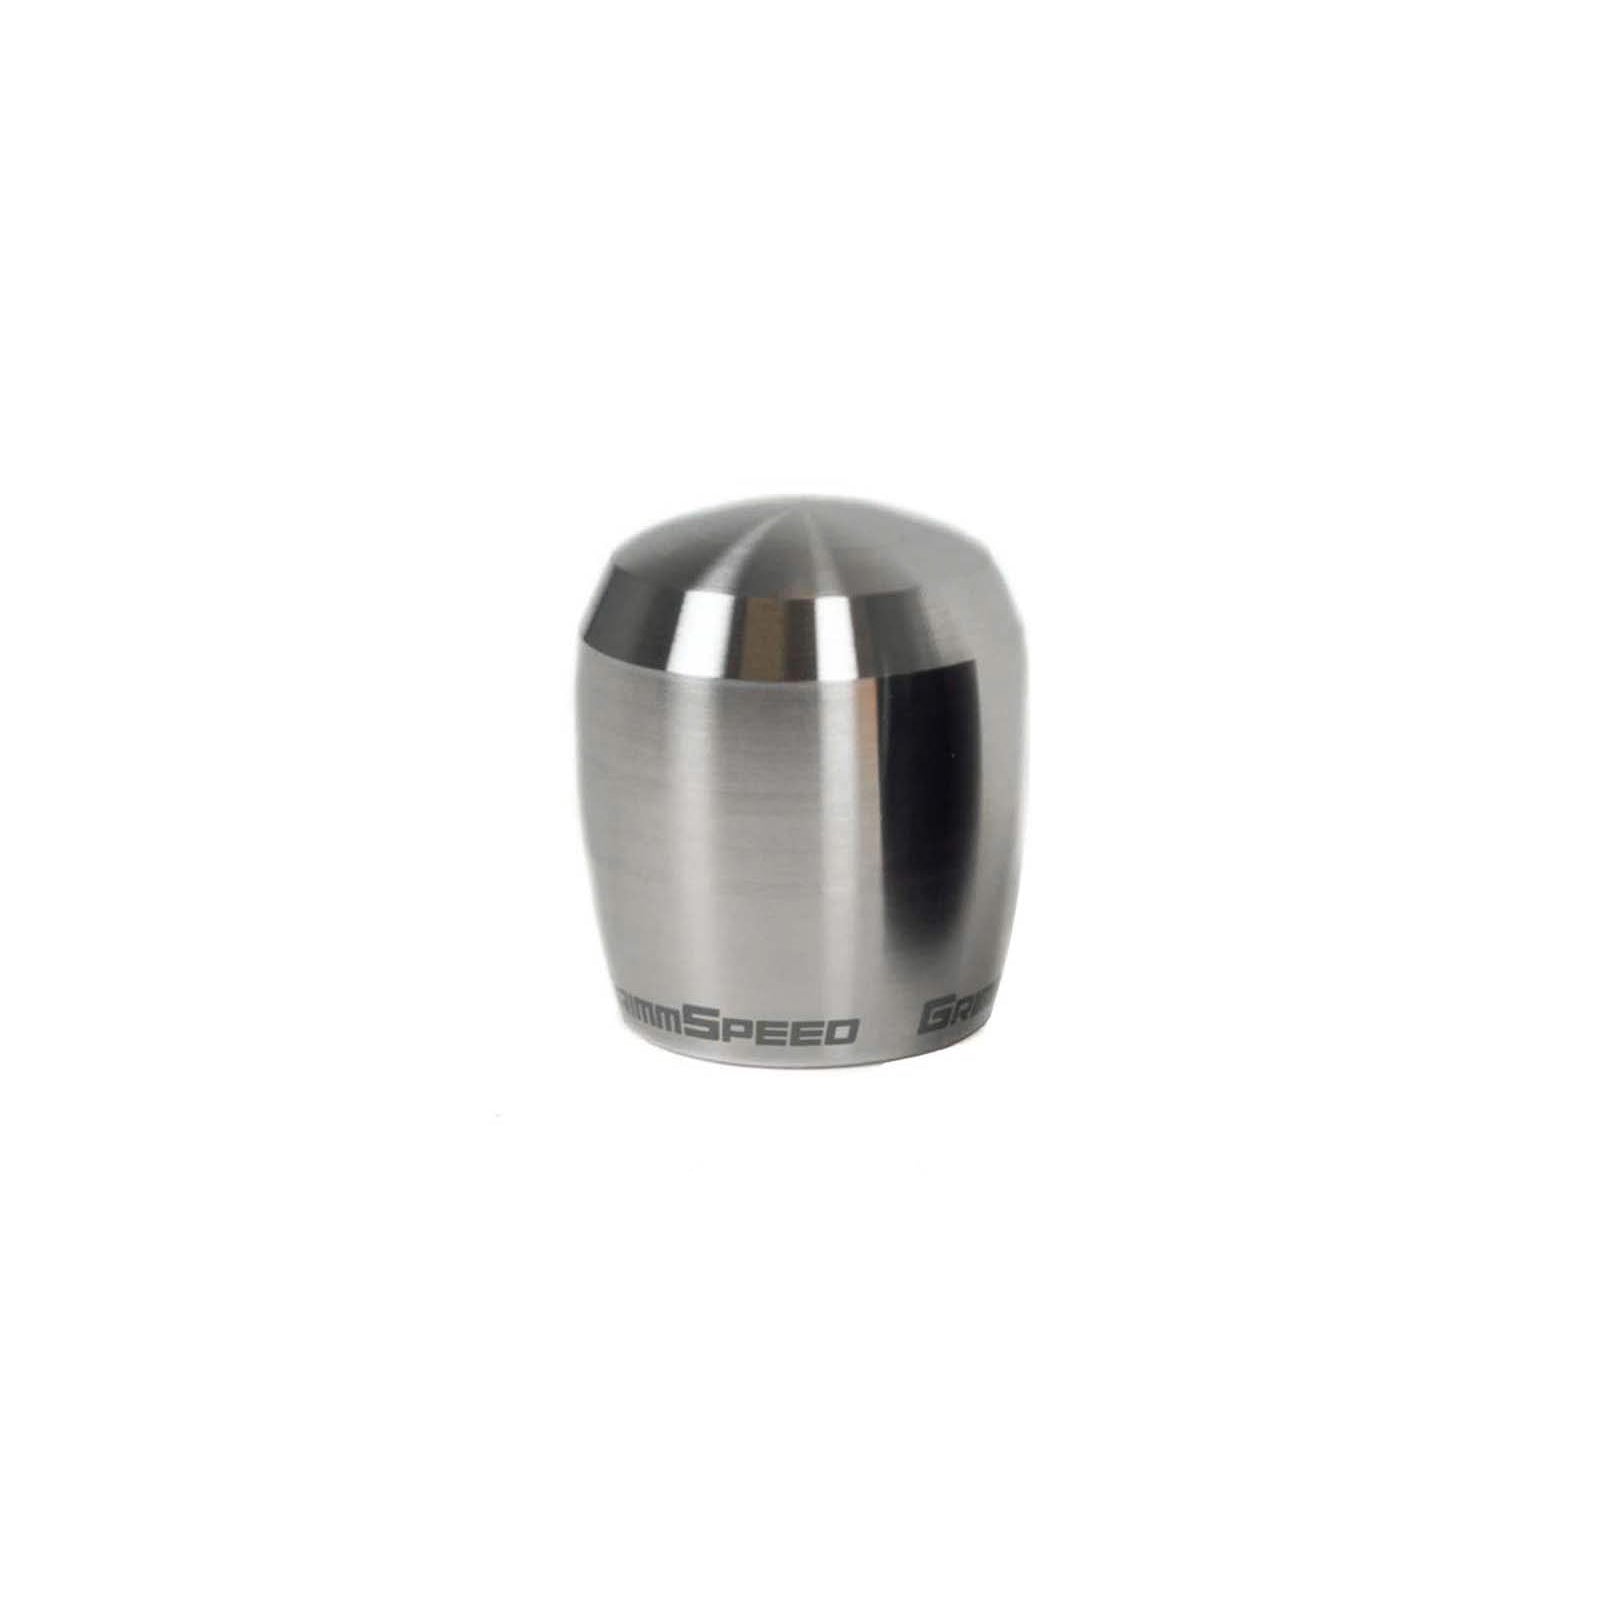 Grimmspeed Stubby Shift Knob - Raw Stainless Steel - Universal